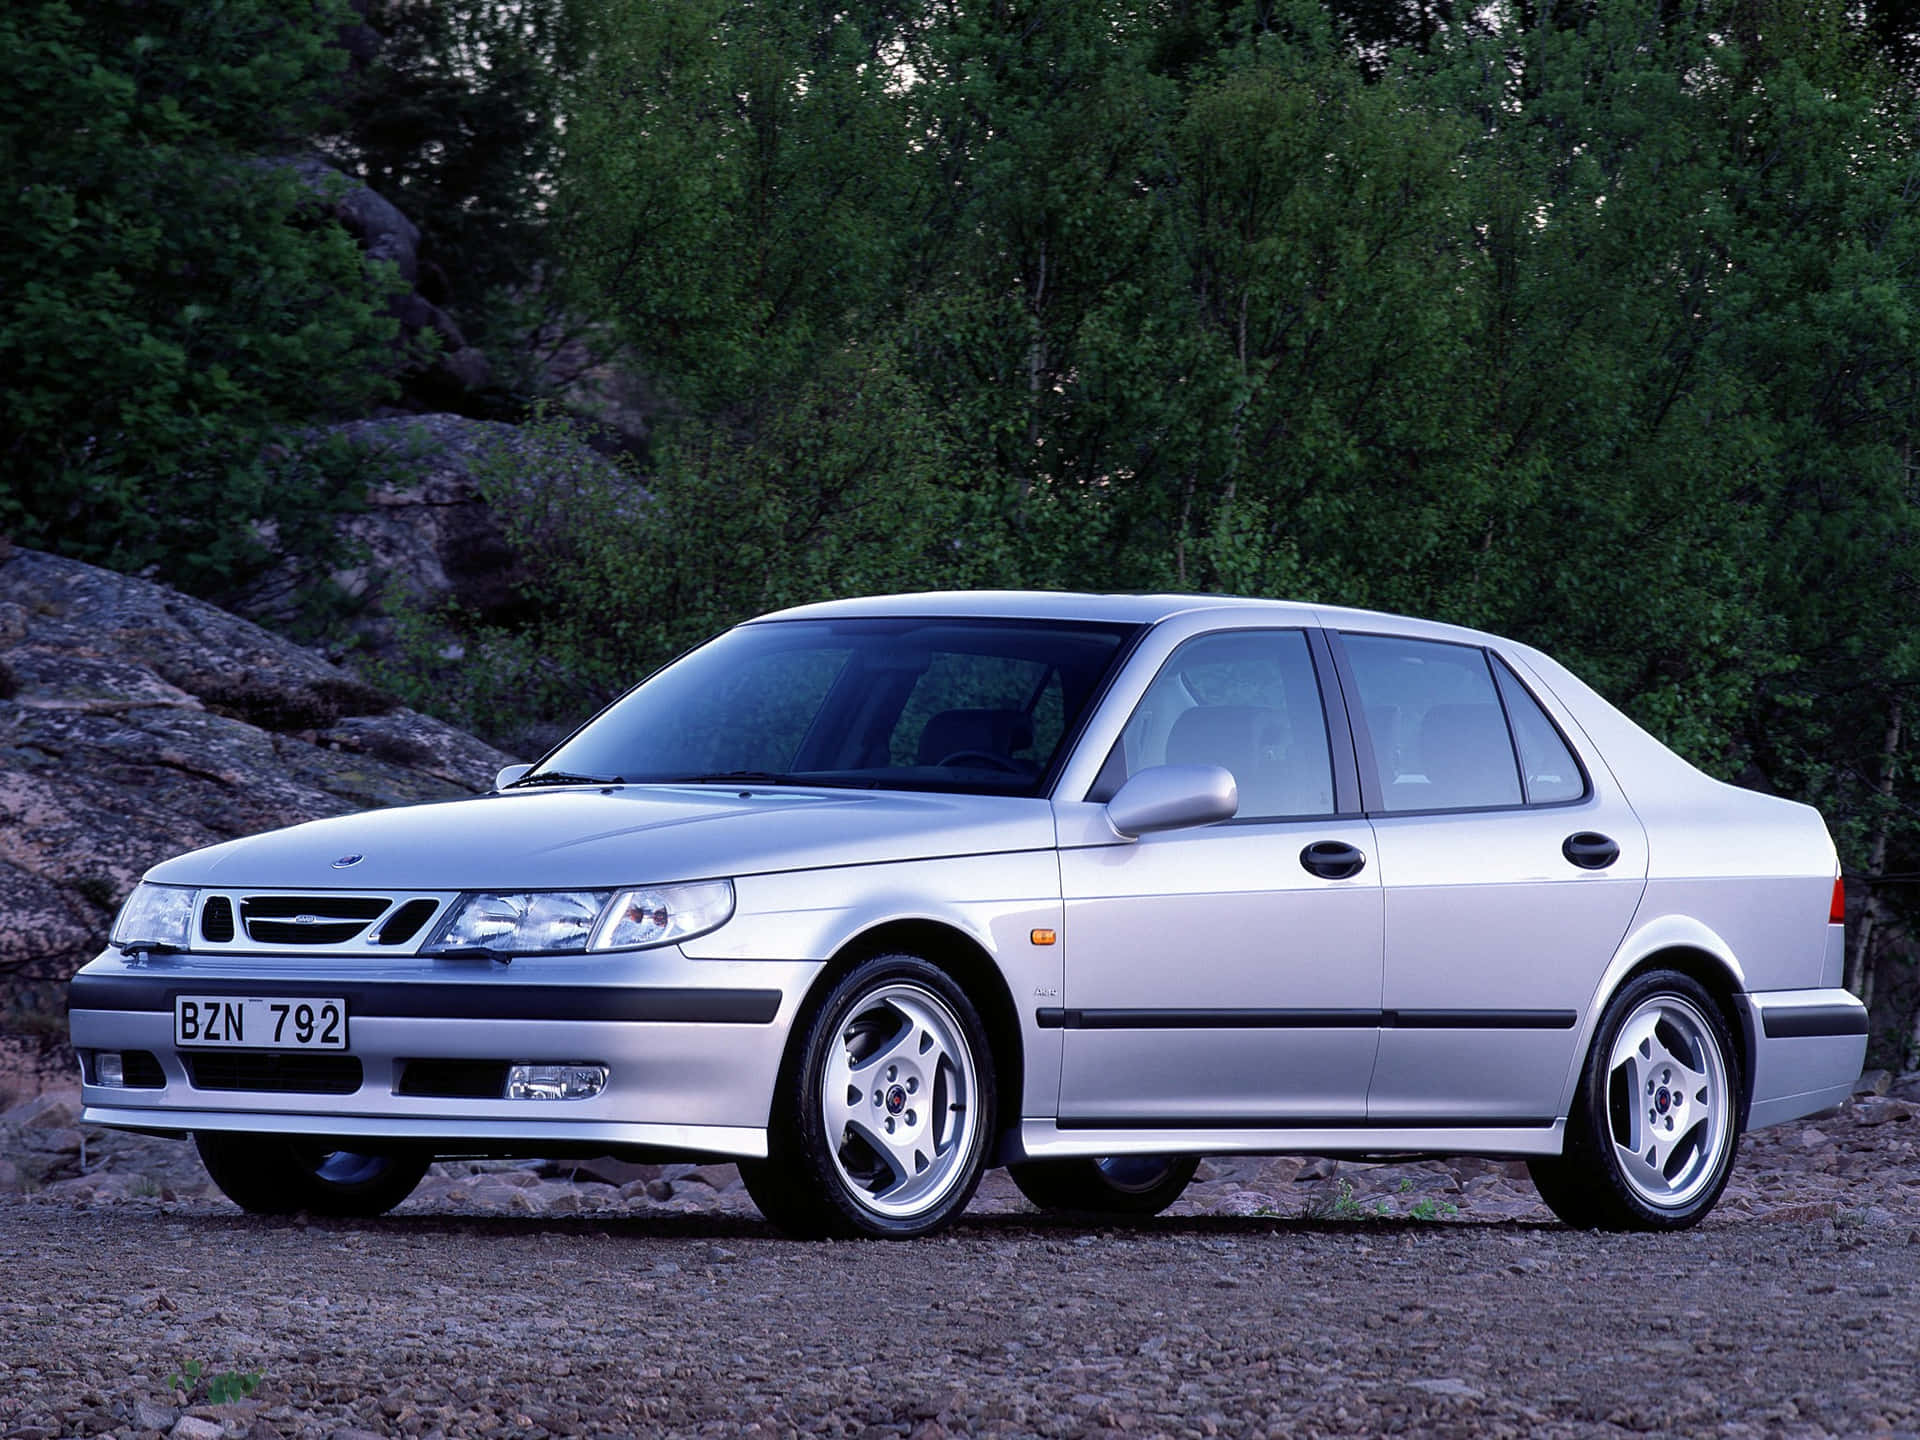 Classic Elegance - Saab 9-5 On A Picturesque Route Wallpaper